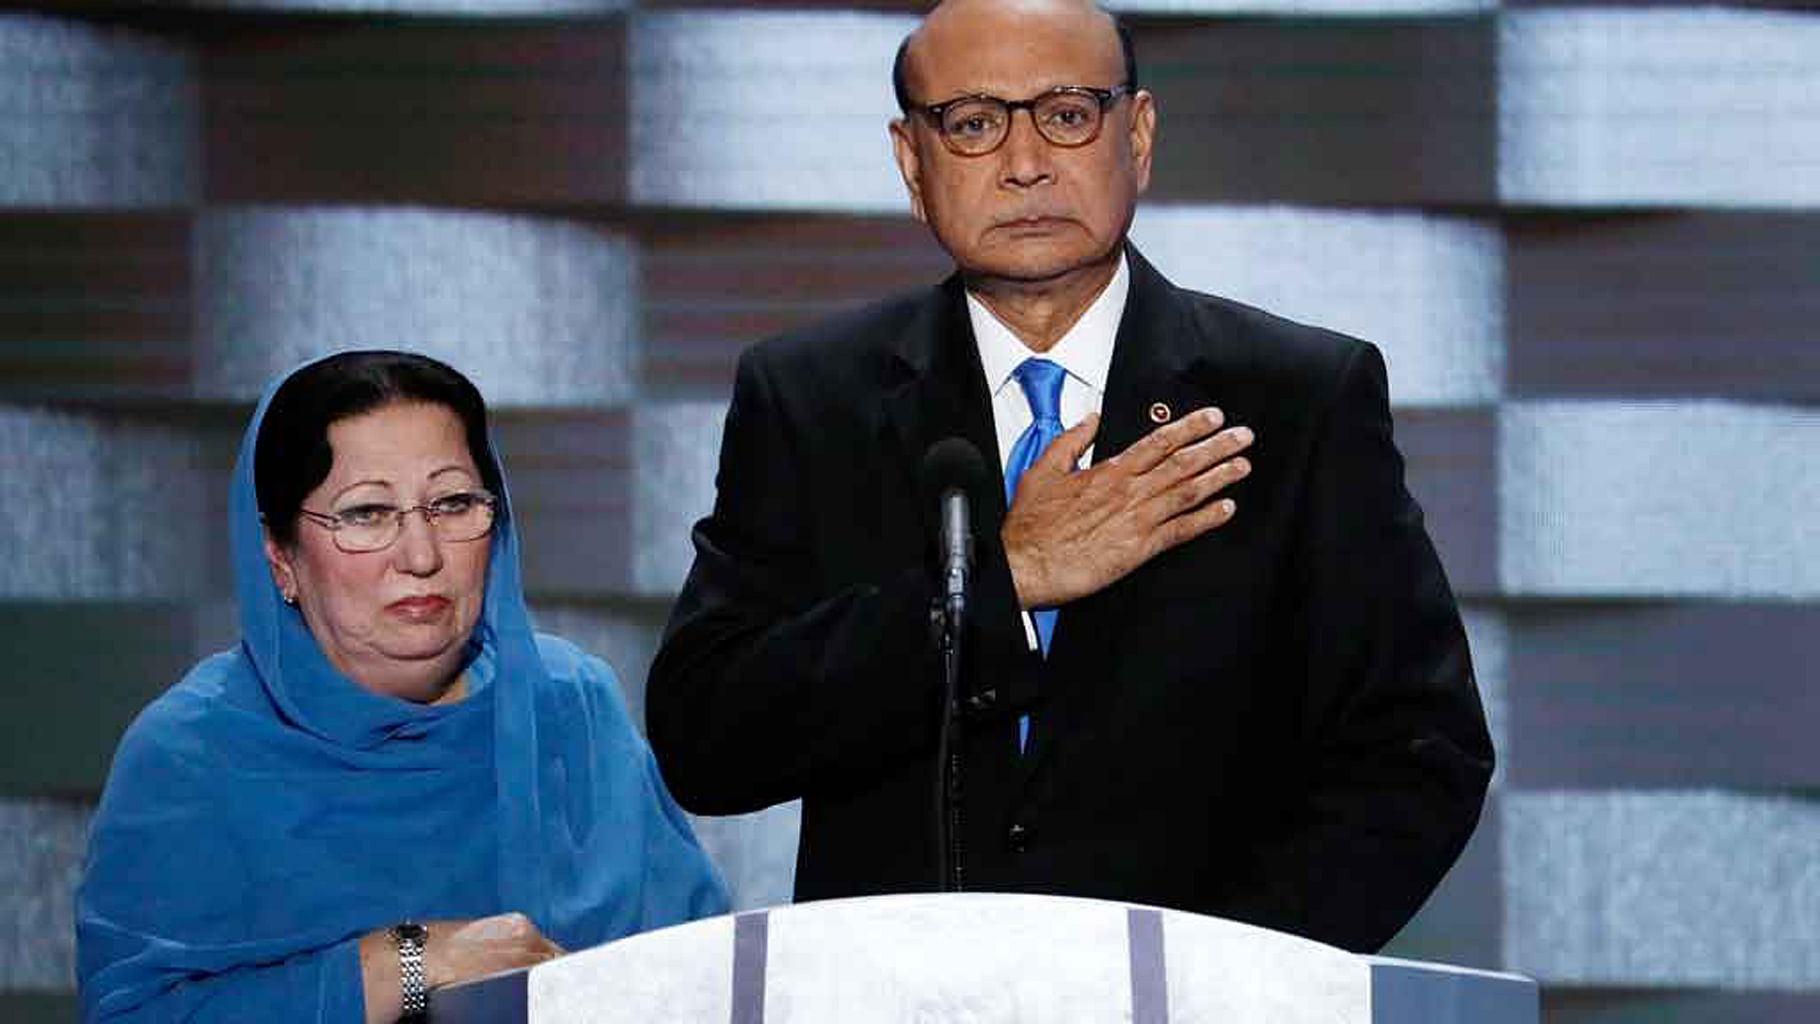 Parents of  US Army Captain, Humayun Khan who was killed by a bomb in Iraq in 2004 speak at the Democratic convention. (Photo: AP)